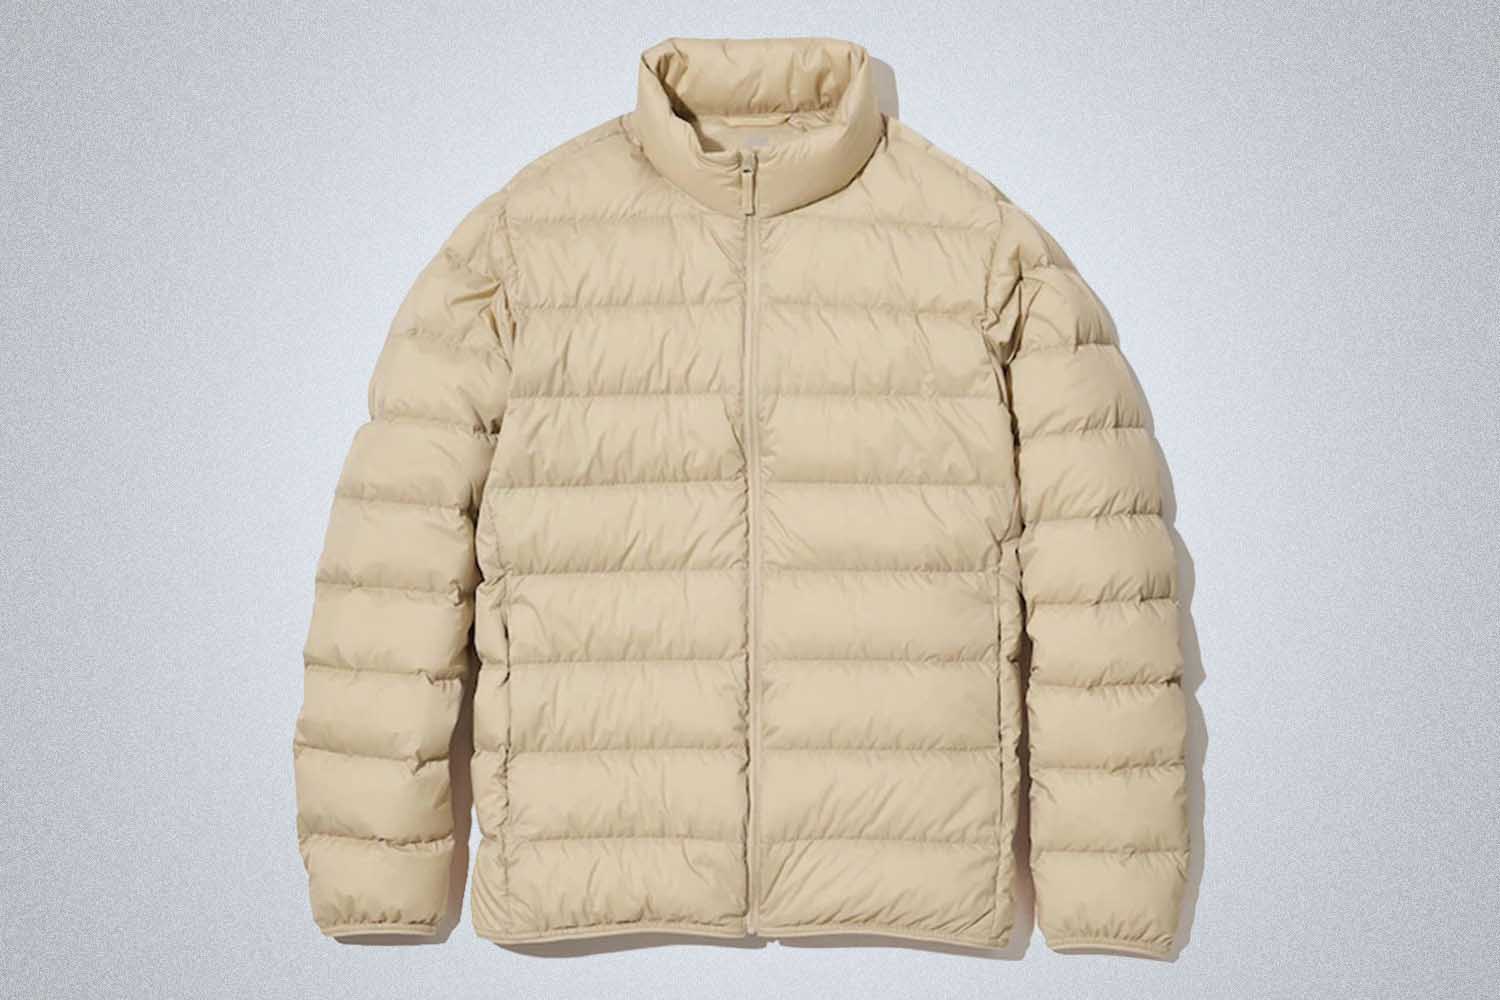 a off-white down jacket from Uniqlo on a grey background